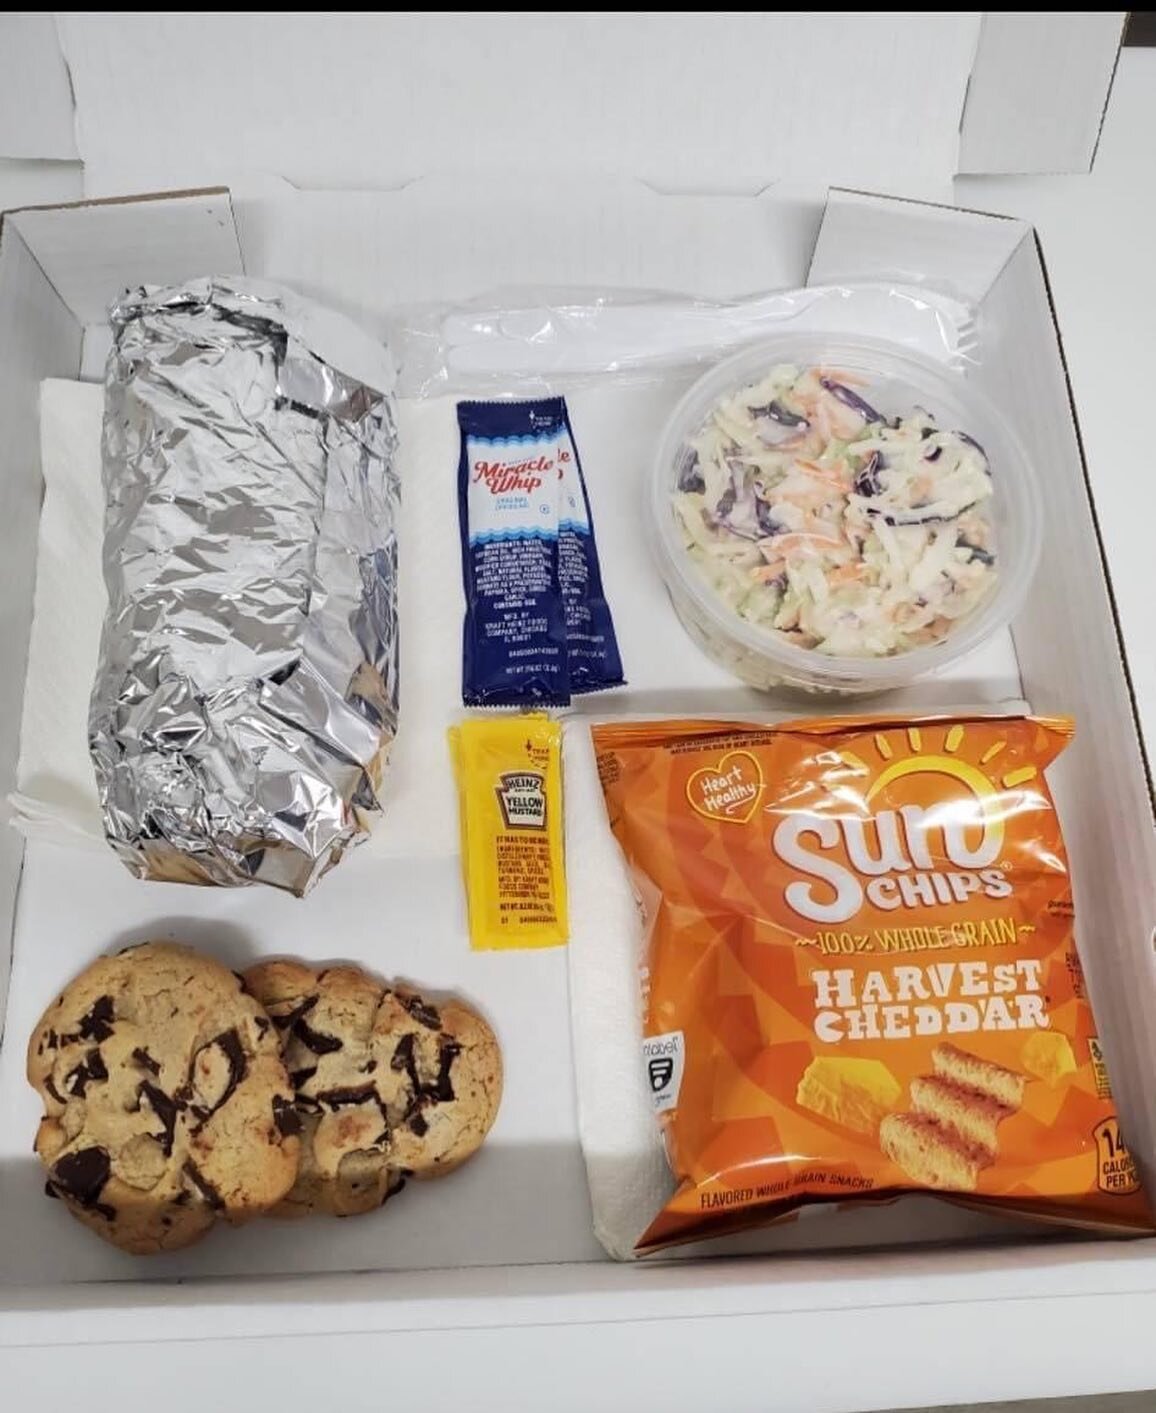 NEW MENU ITEM! We are now serving lunch boxes for just $8!! Our lunch boxes will come with your choice of 6&rdquo; sub, bag of chips, side of coleslaw, and cookies! Served daily from 11am-2pm.🍽